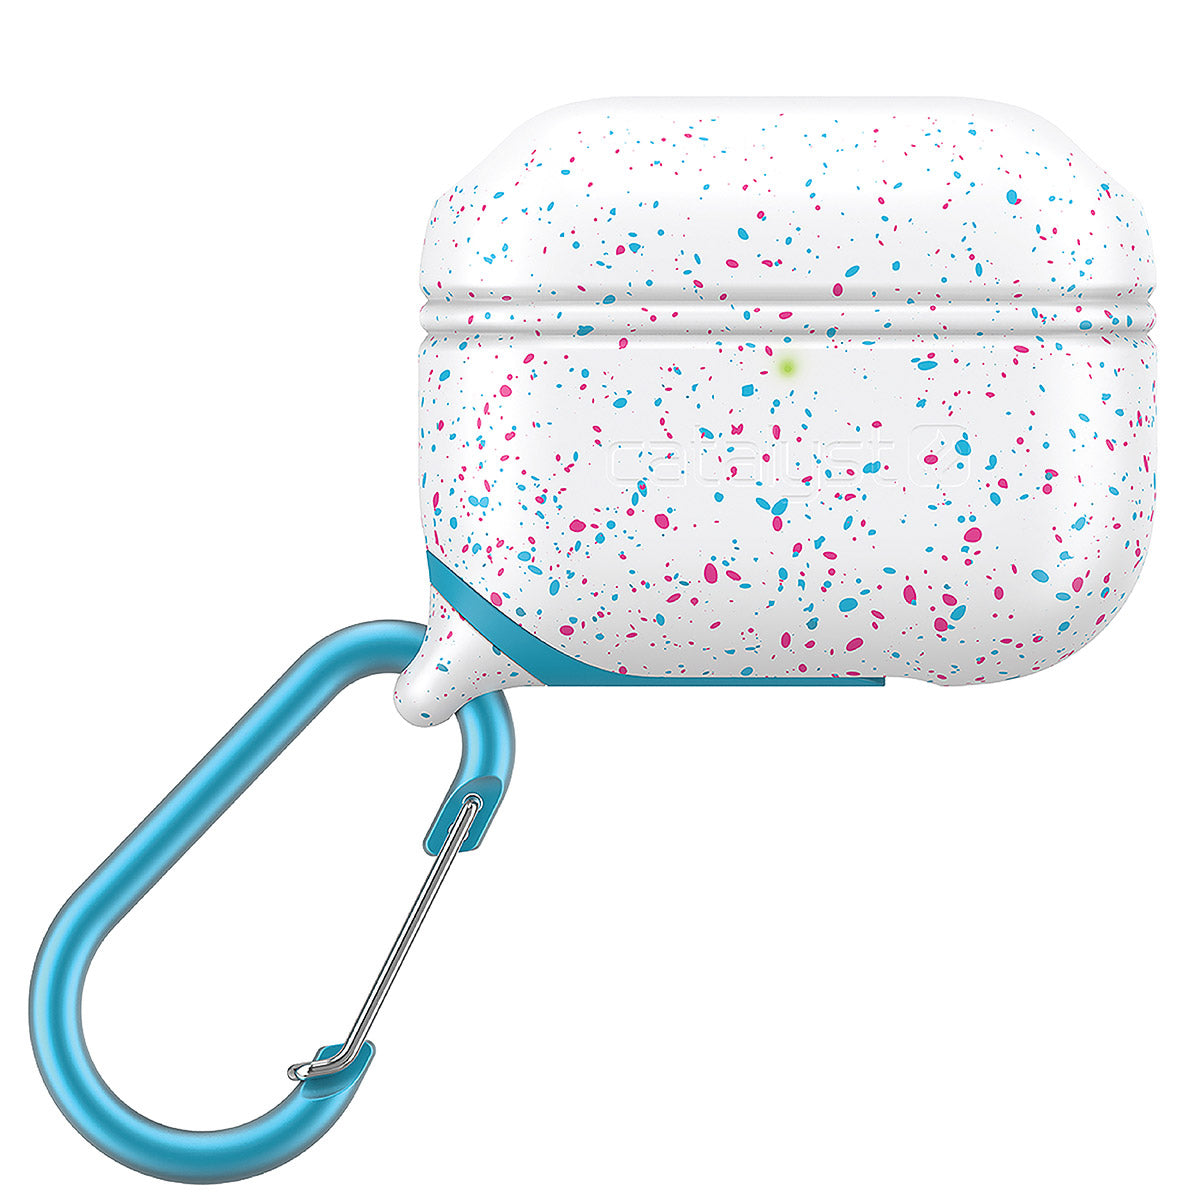 CATAPLAPDPROFUN | catalyst airpods pro gen 2 1 waterproof case carabiner special edition funfetti front view